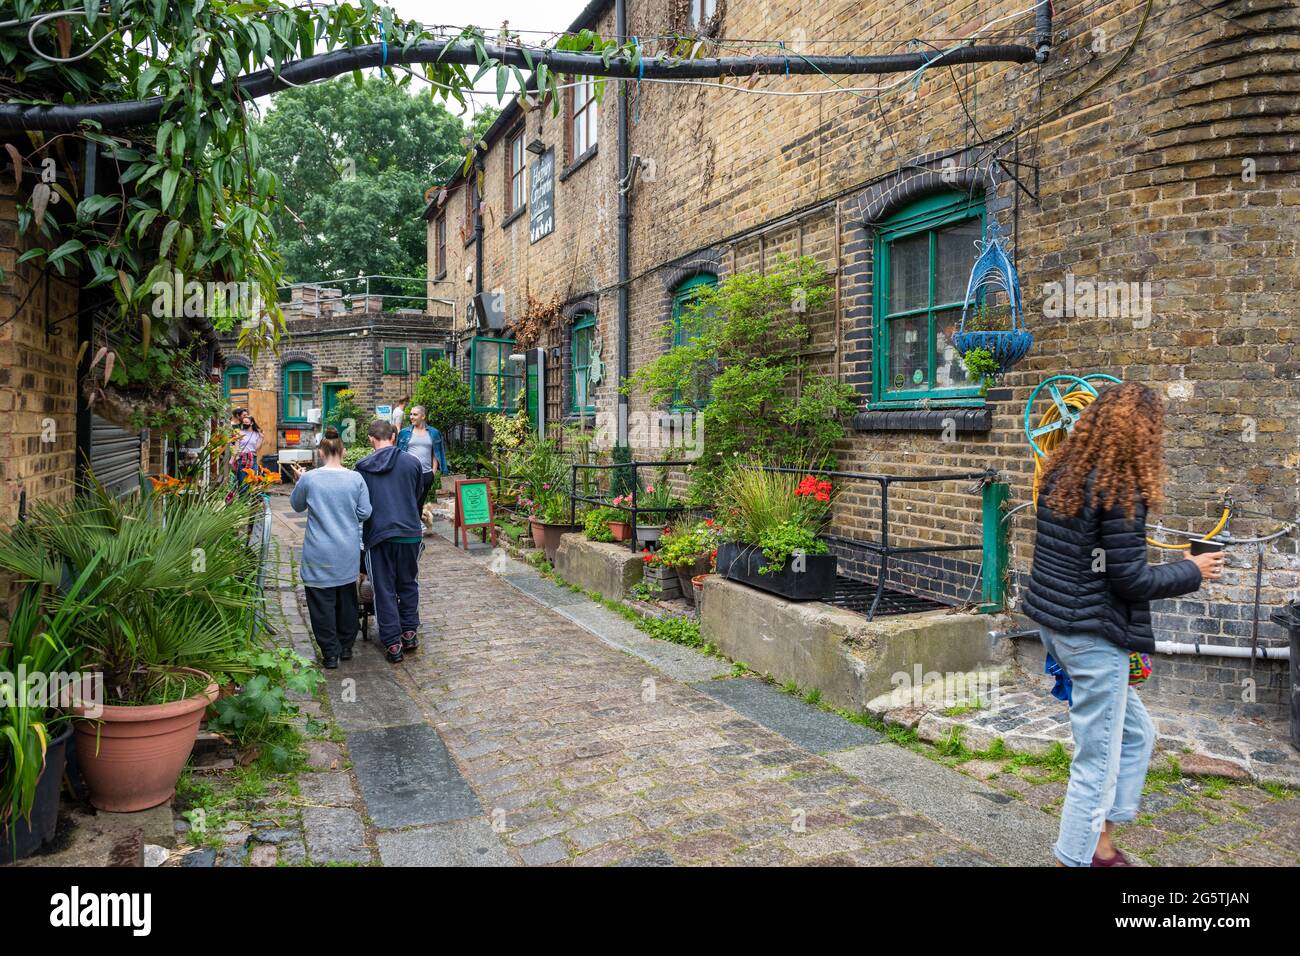 London. UK-06.27.2021: visitors and tourists in Hackney City Farm. Stock Photo